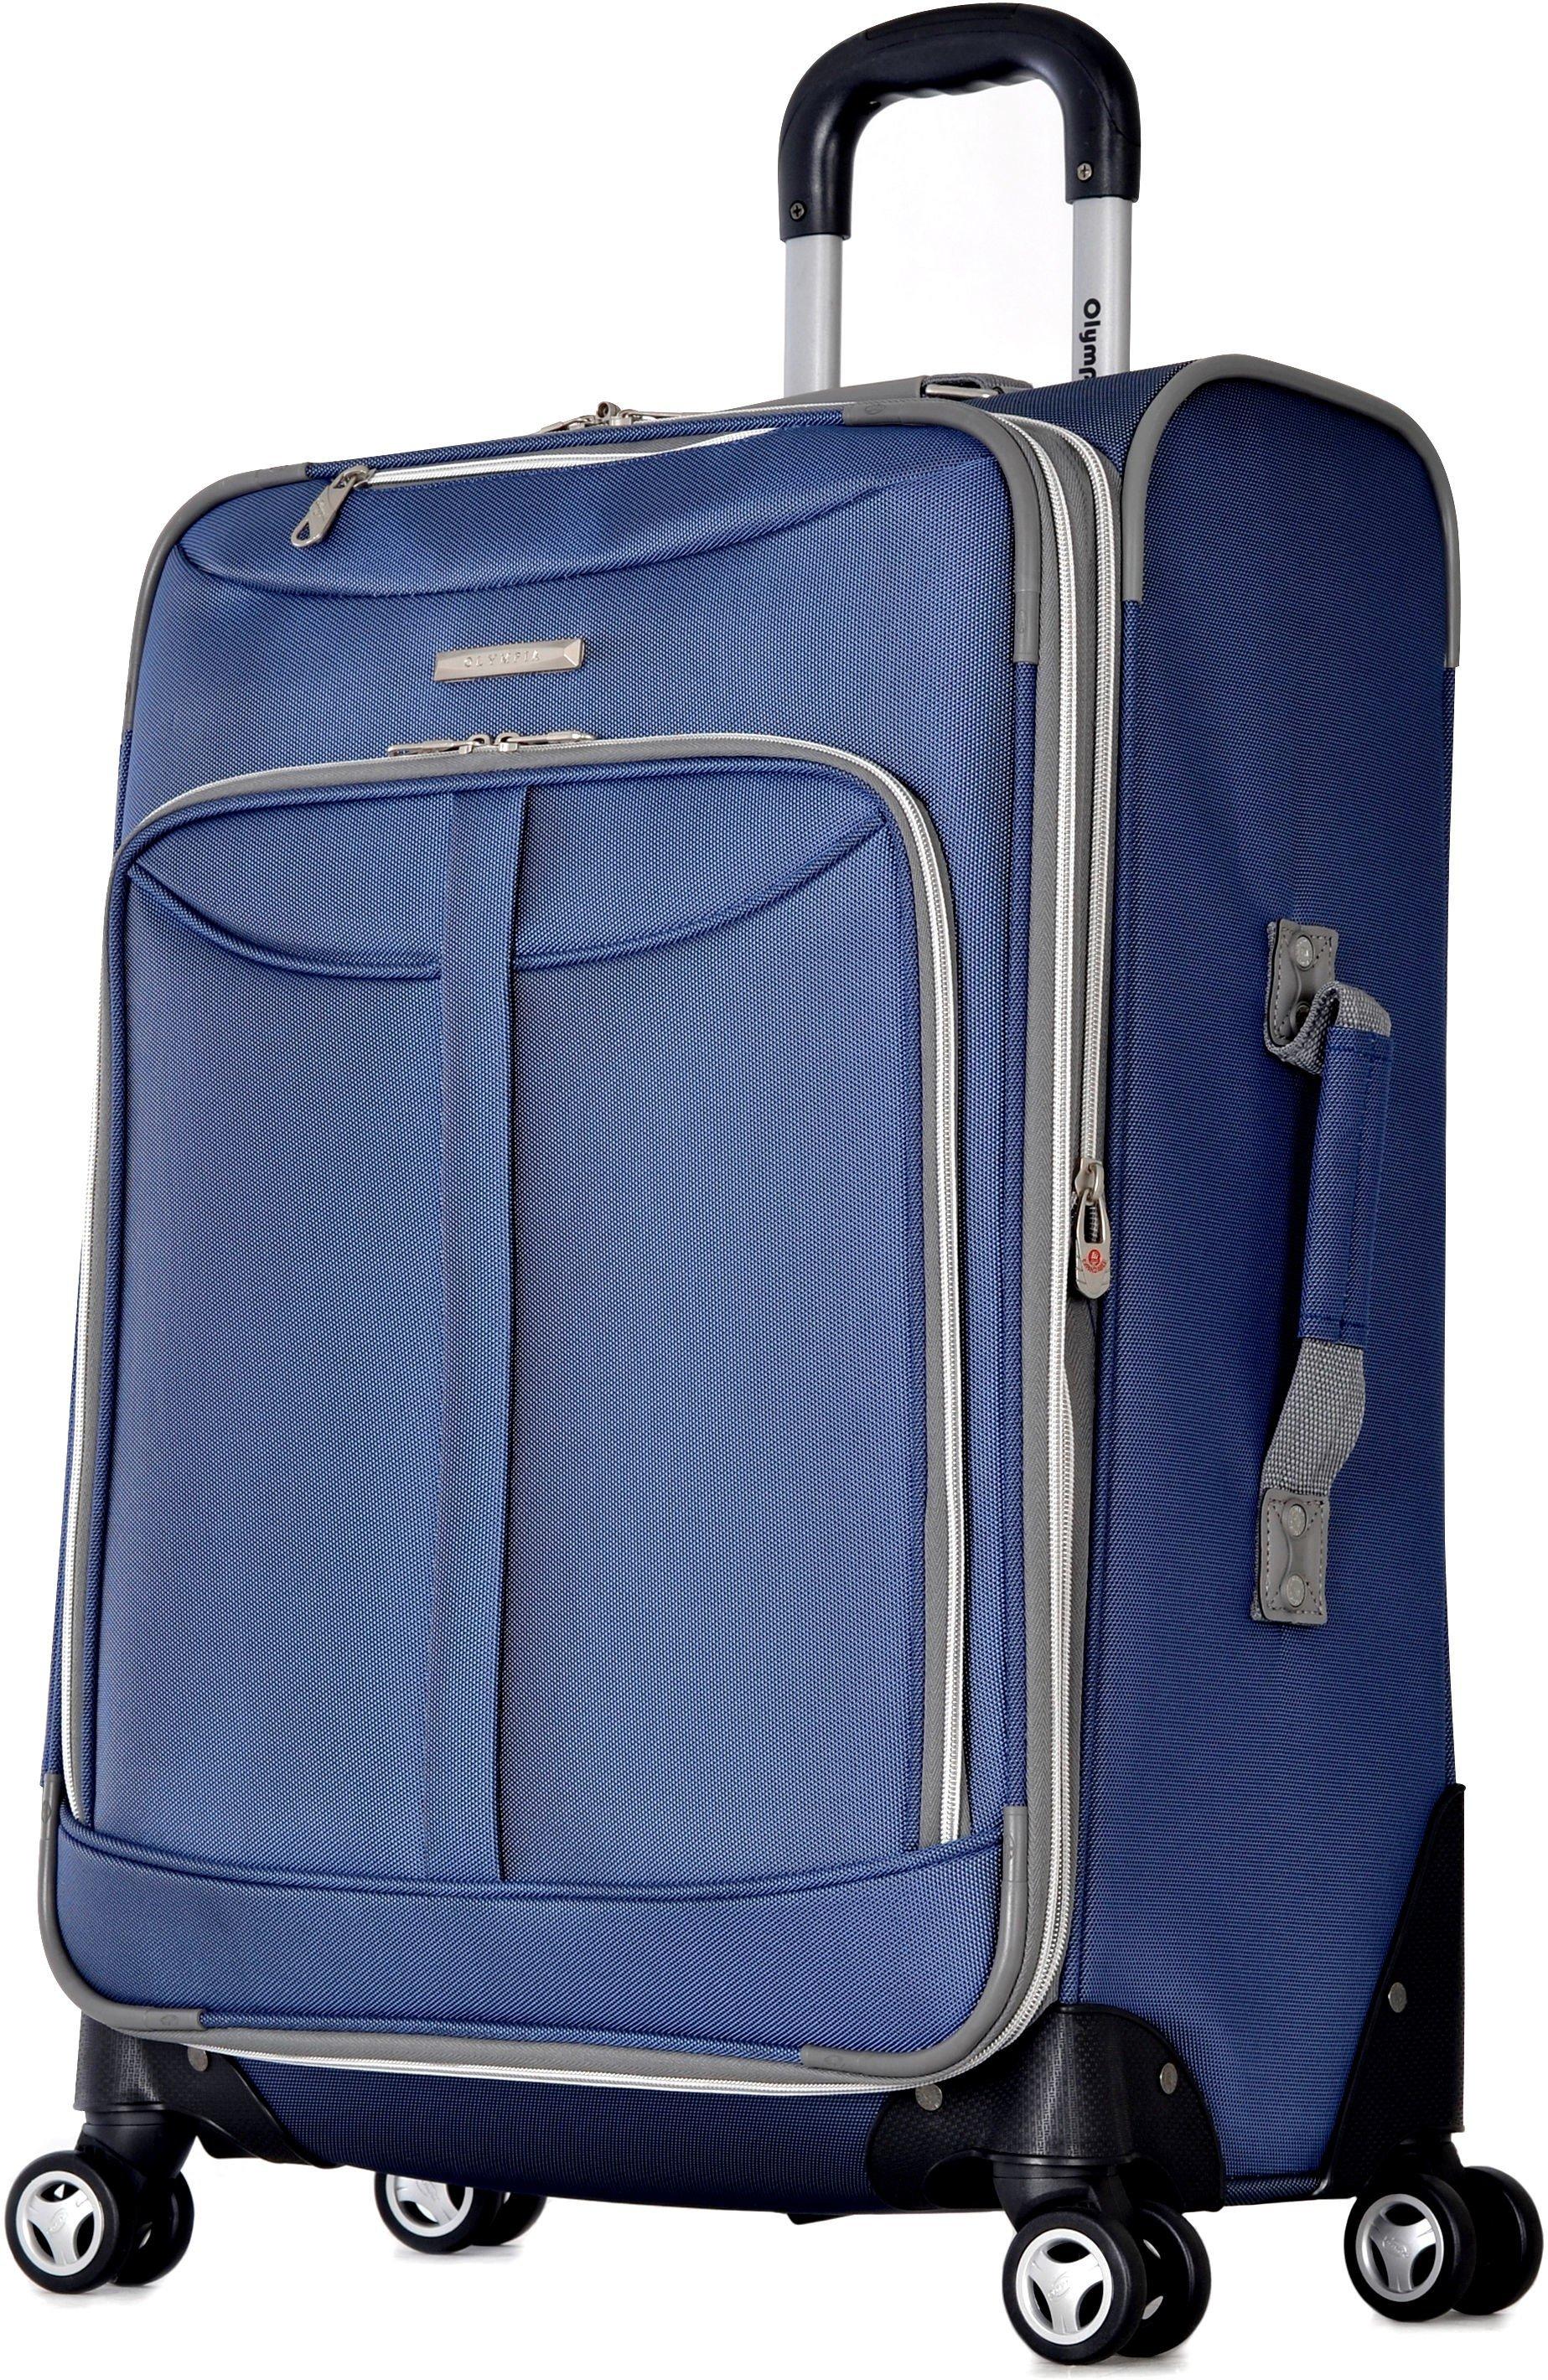 Photos - Travel Accessory Olympia Luggage 25 Inch Tuscany Spinner Luggage